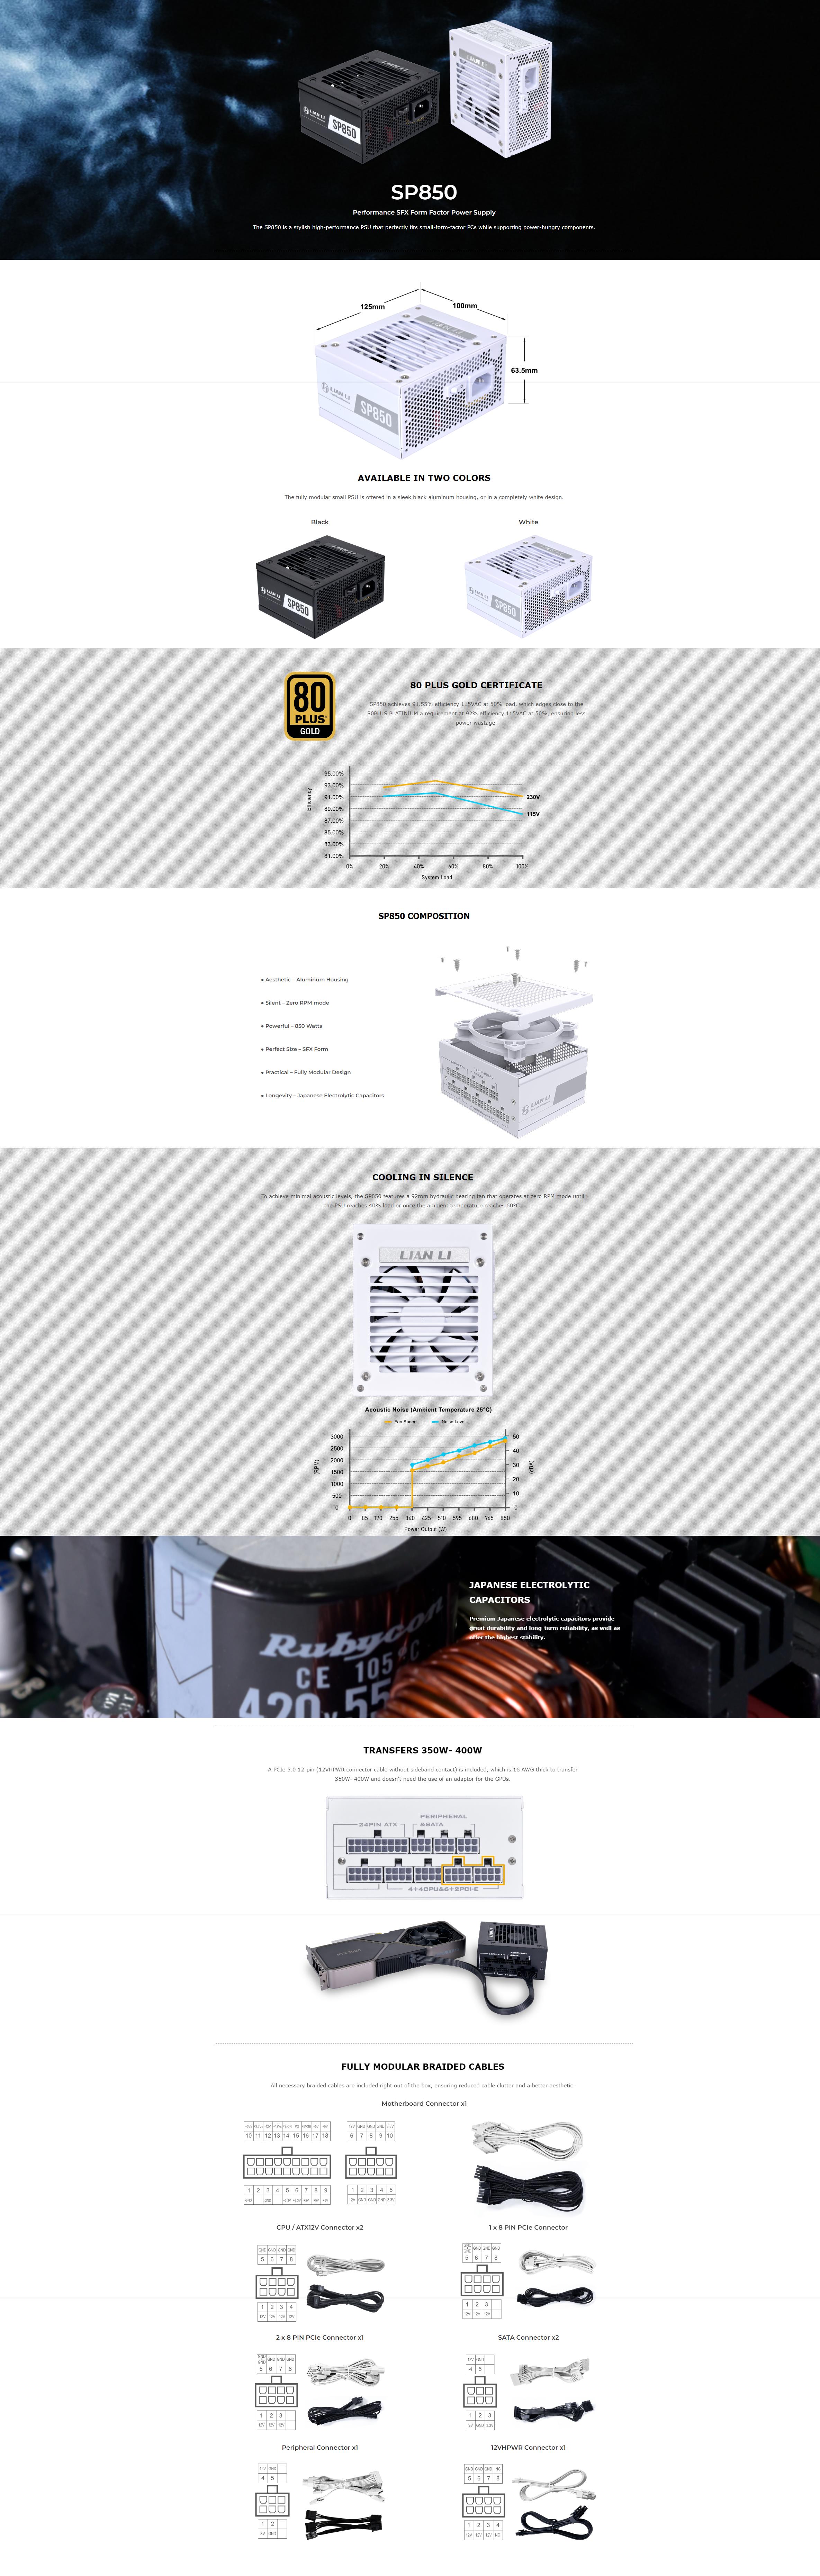 A large marketing image providing additional information about the product Lian Li SP850 850W Gold SFX Modular PSU - White - Additional alt info not provided